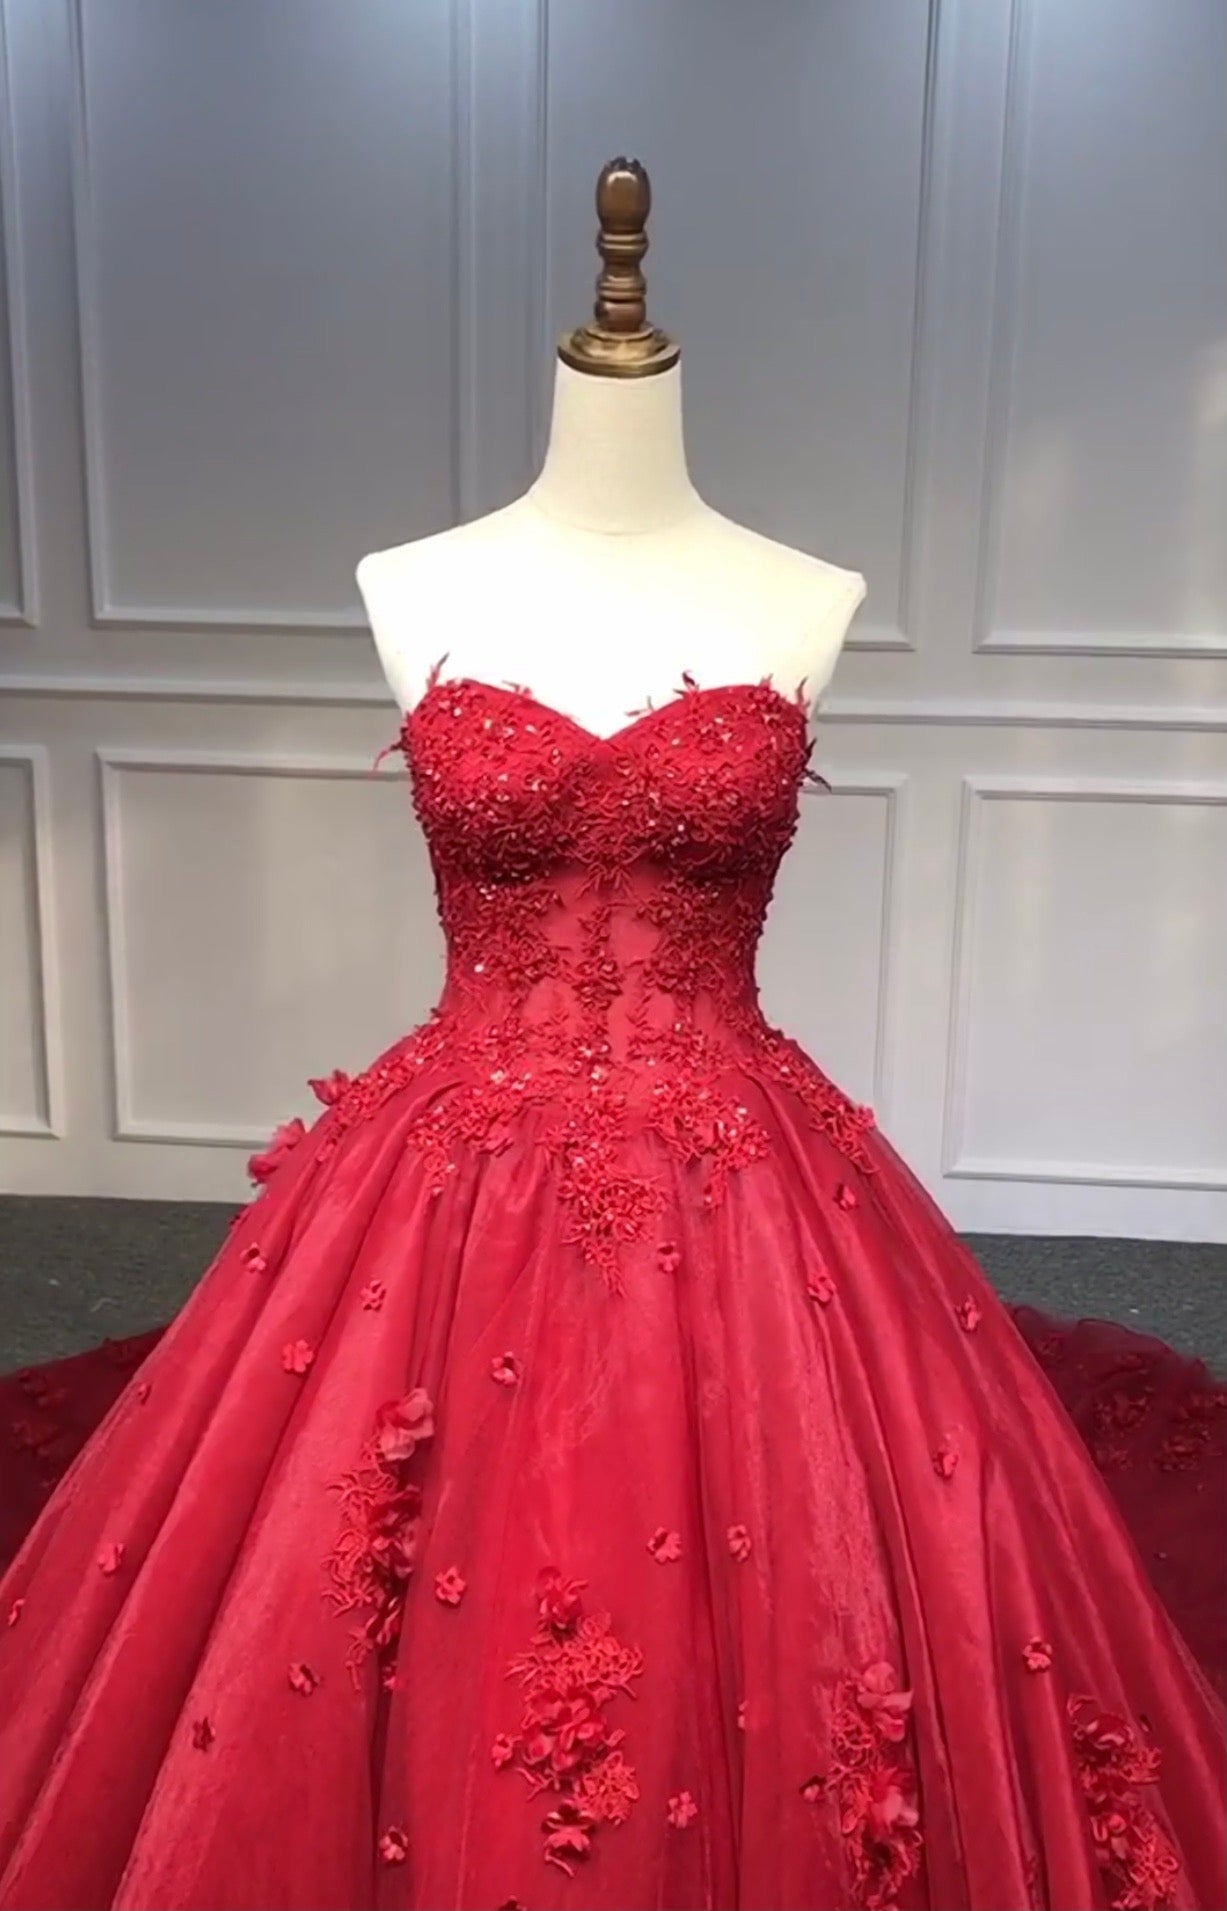 Fairy Dresses & Fairytale Style Formal Prom Gowns - Xdressy